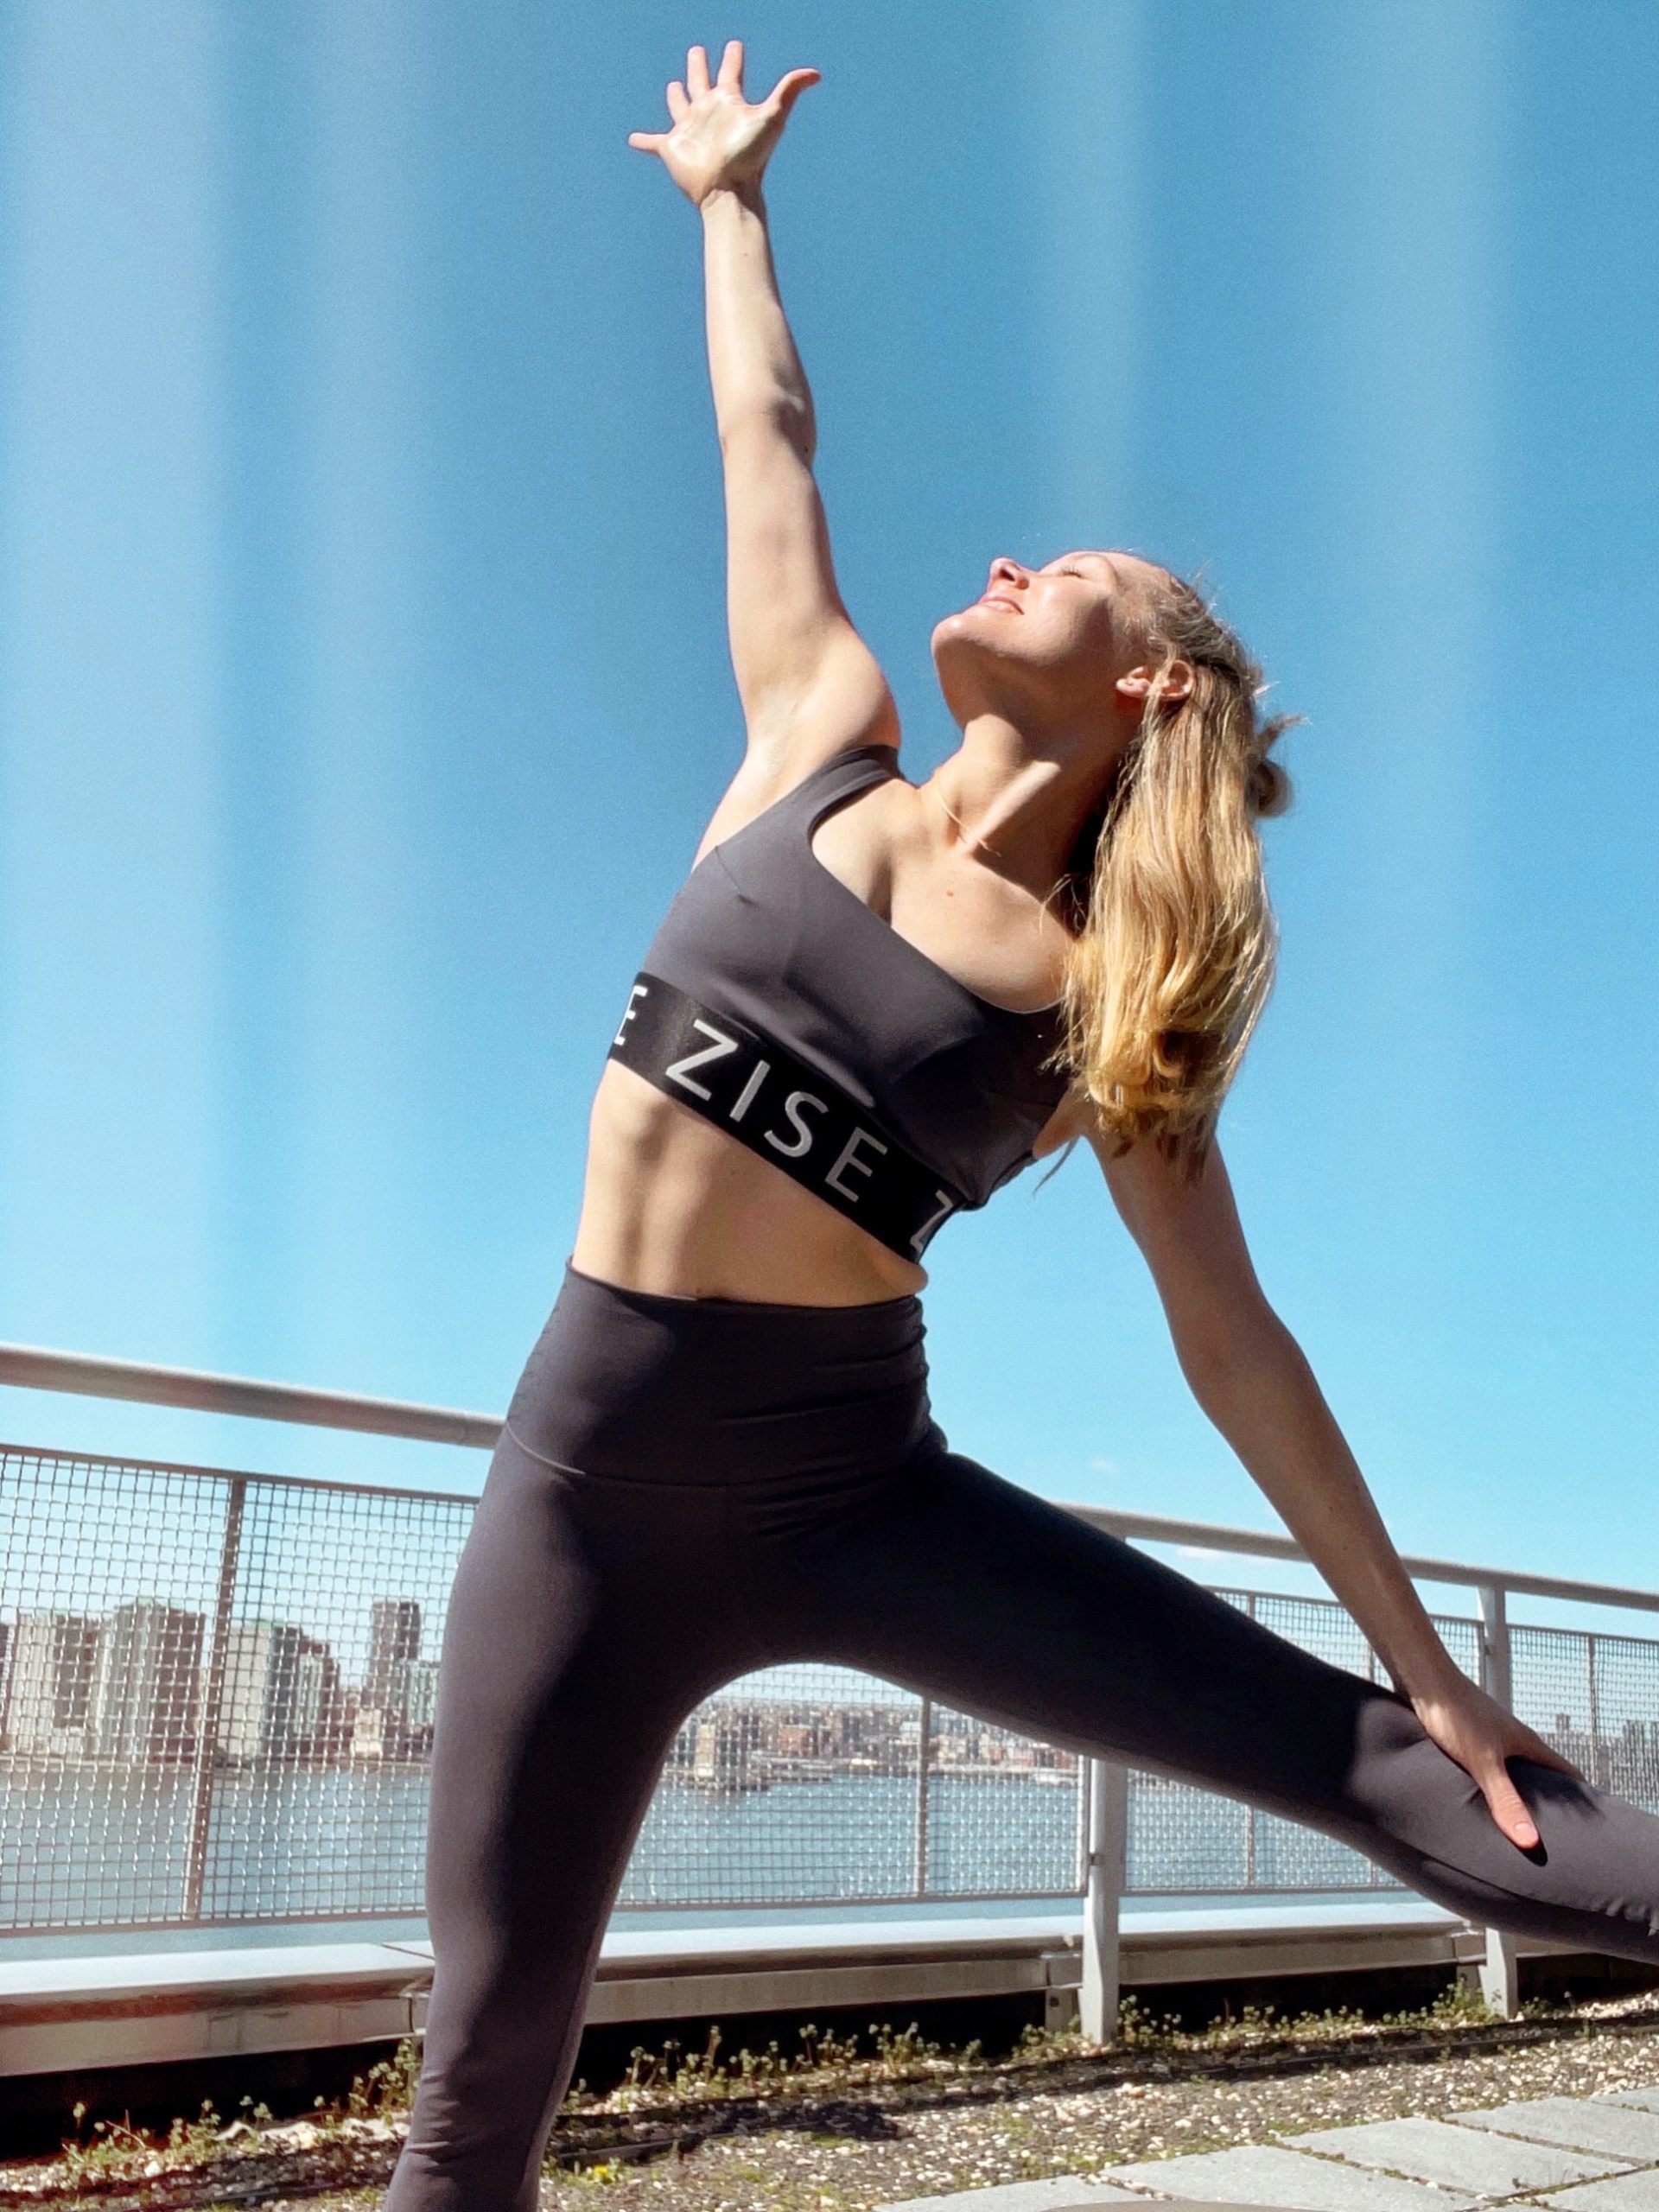 A woman wearing black ZISE workout clothes stretching her legs while reaching one arm to the sky